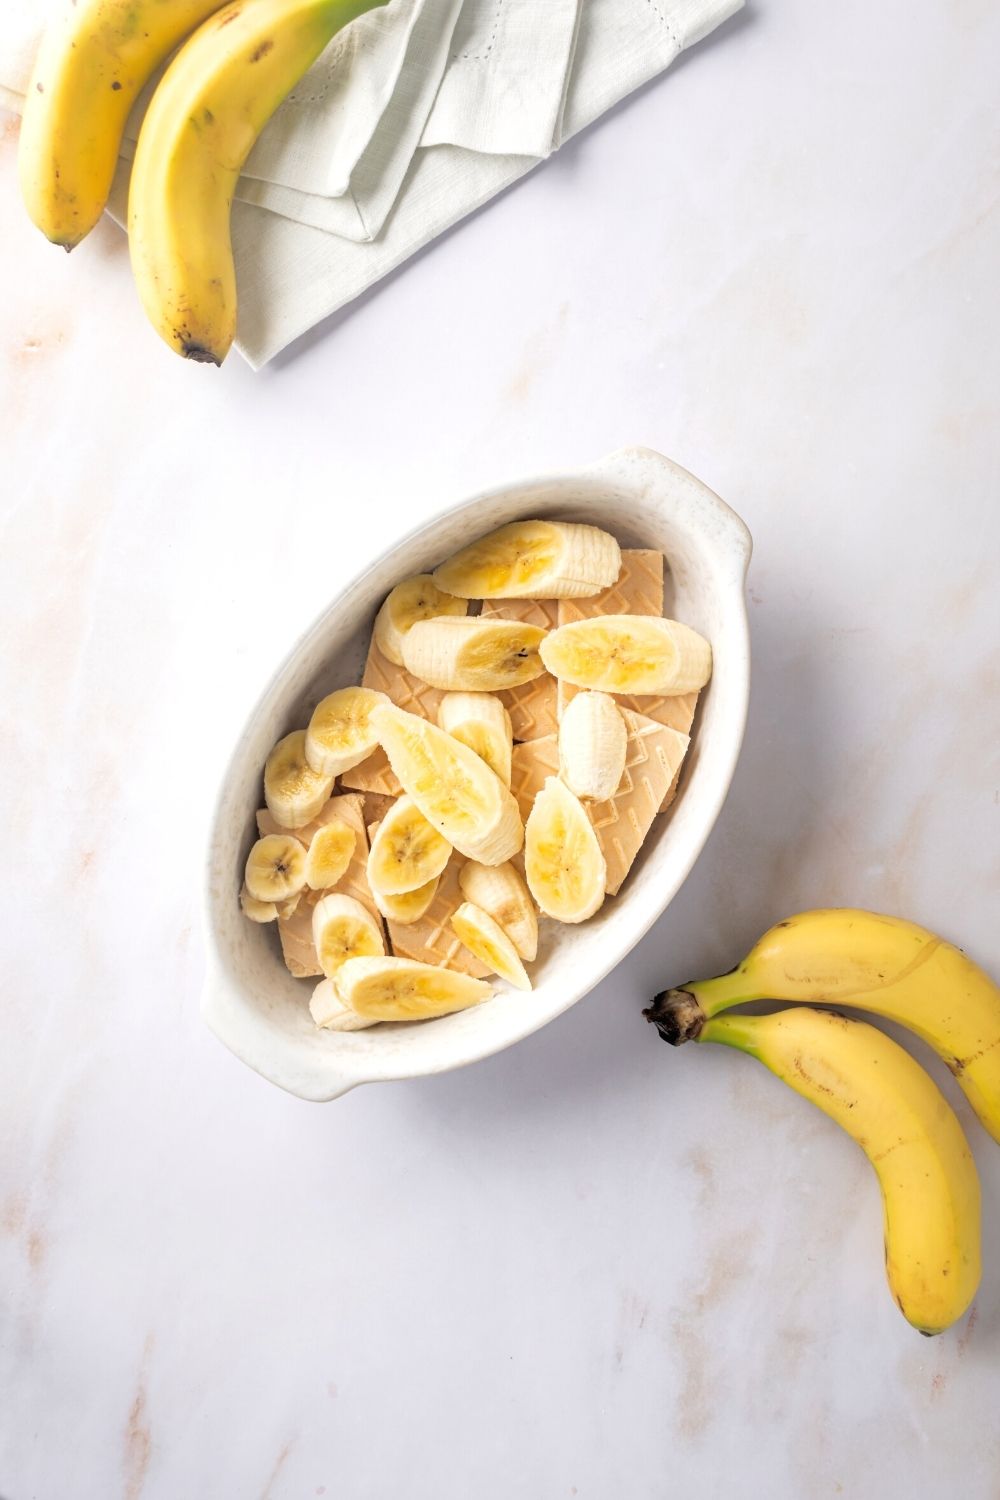 Banana slices on top of vanilla wafer cookies in a white casserole dish. There are two bananas in front of the dish and part of two bananas behind the dish.